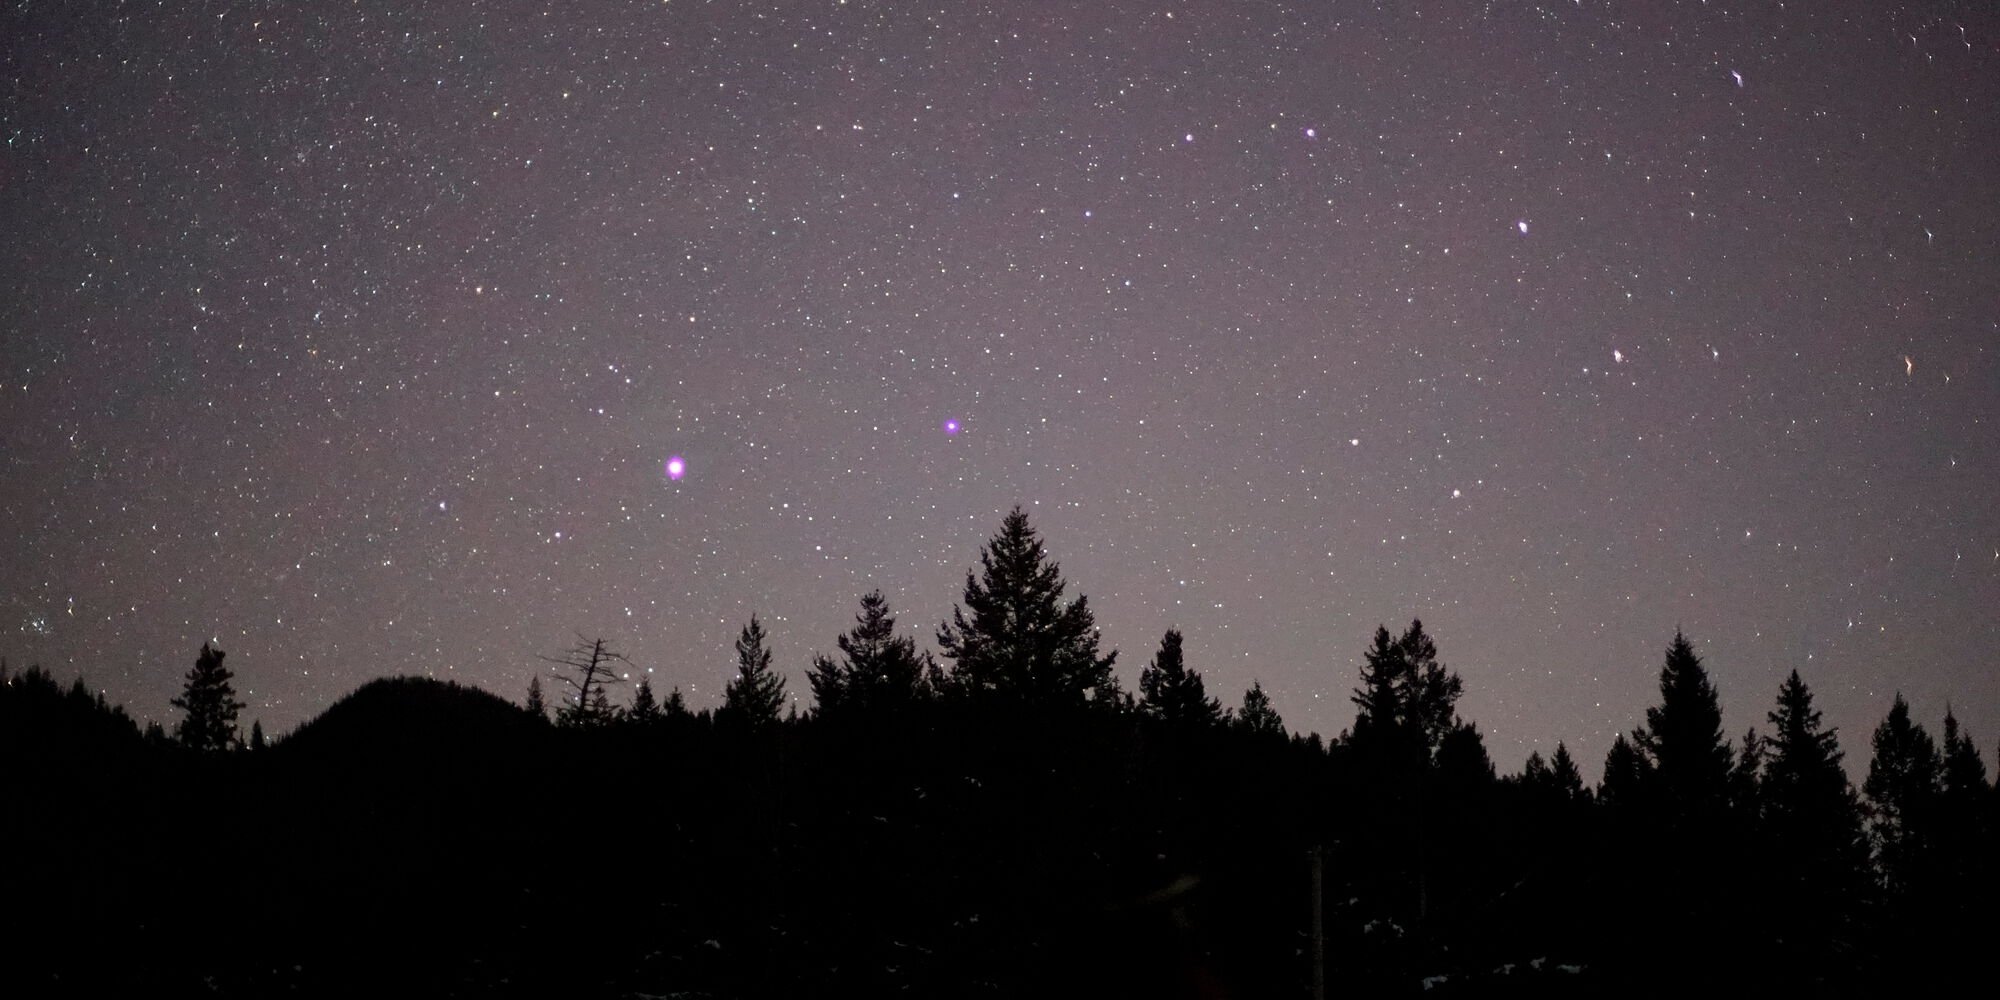 The bottom of the frame shows the silhouette of evergreen trees at night, and above them is a dark sky filled with stars